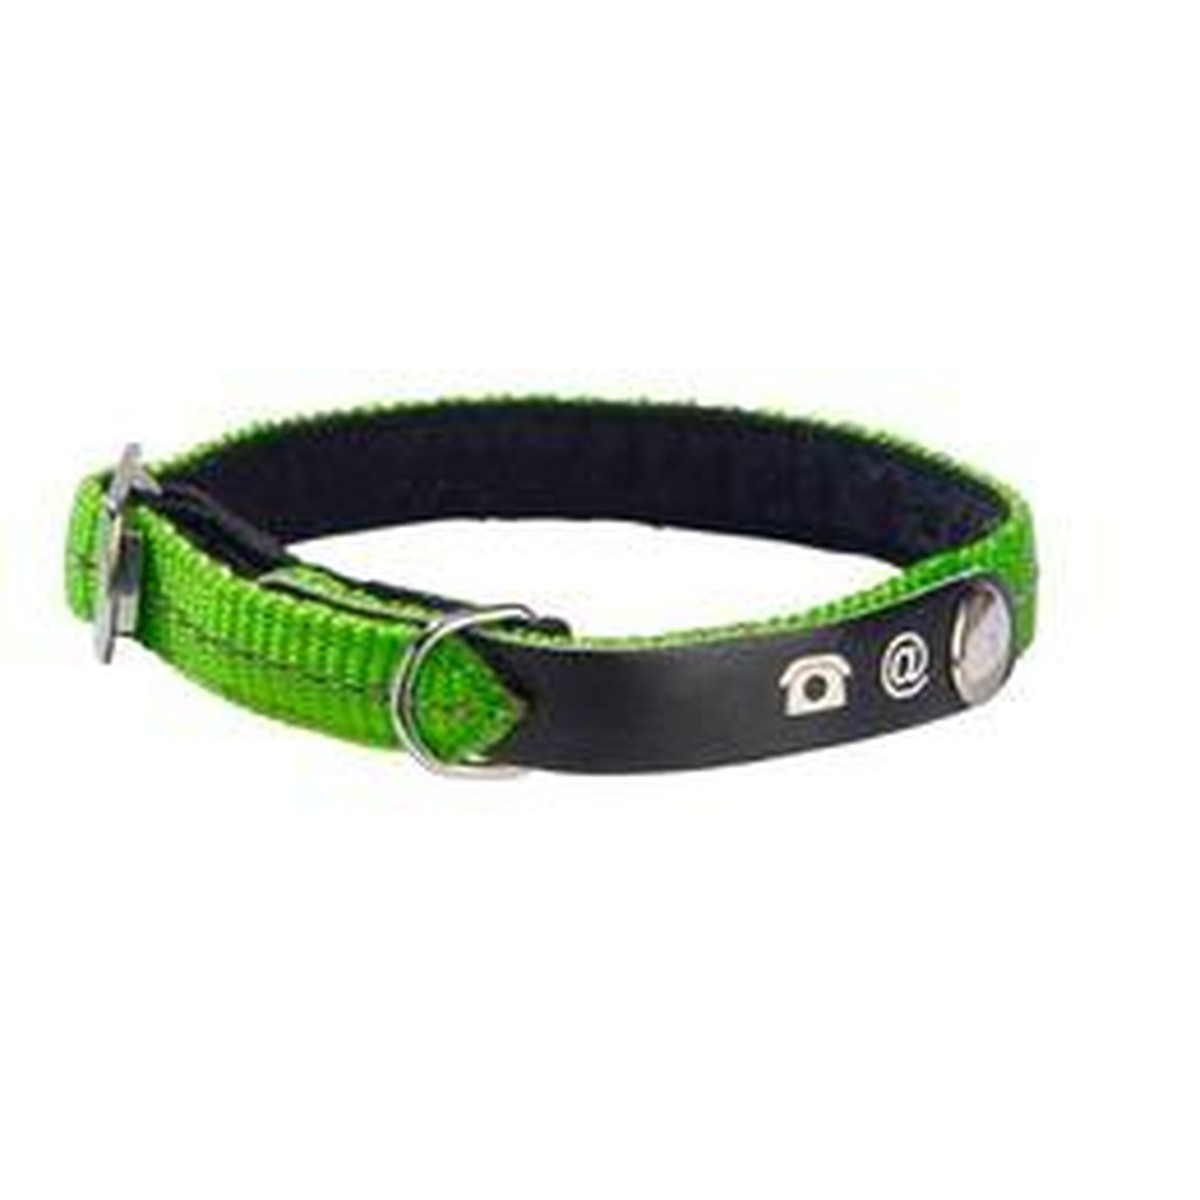 Bobby lost COLLIER CHAT LOST TXS Vert pin XS